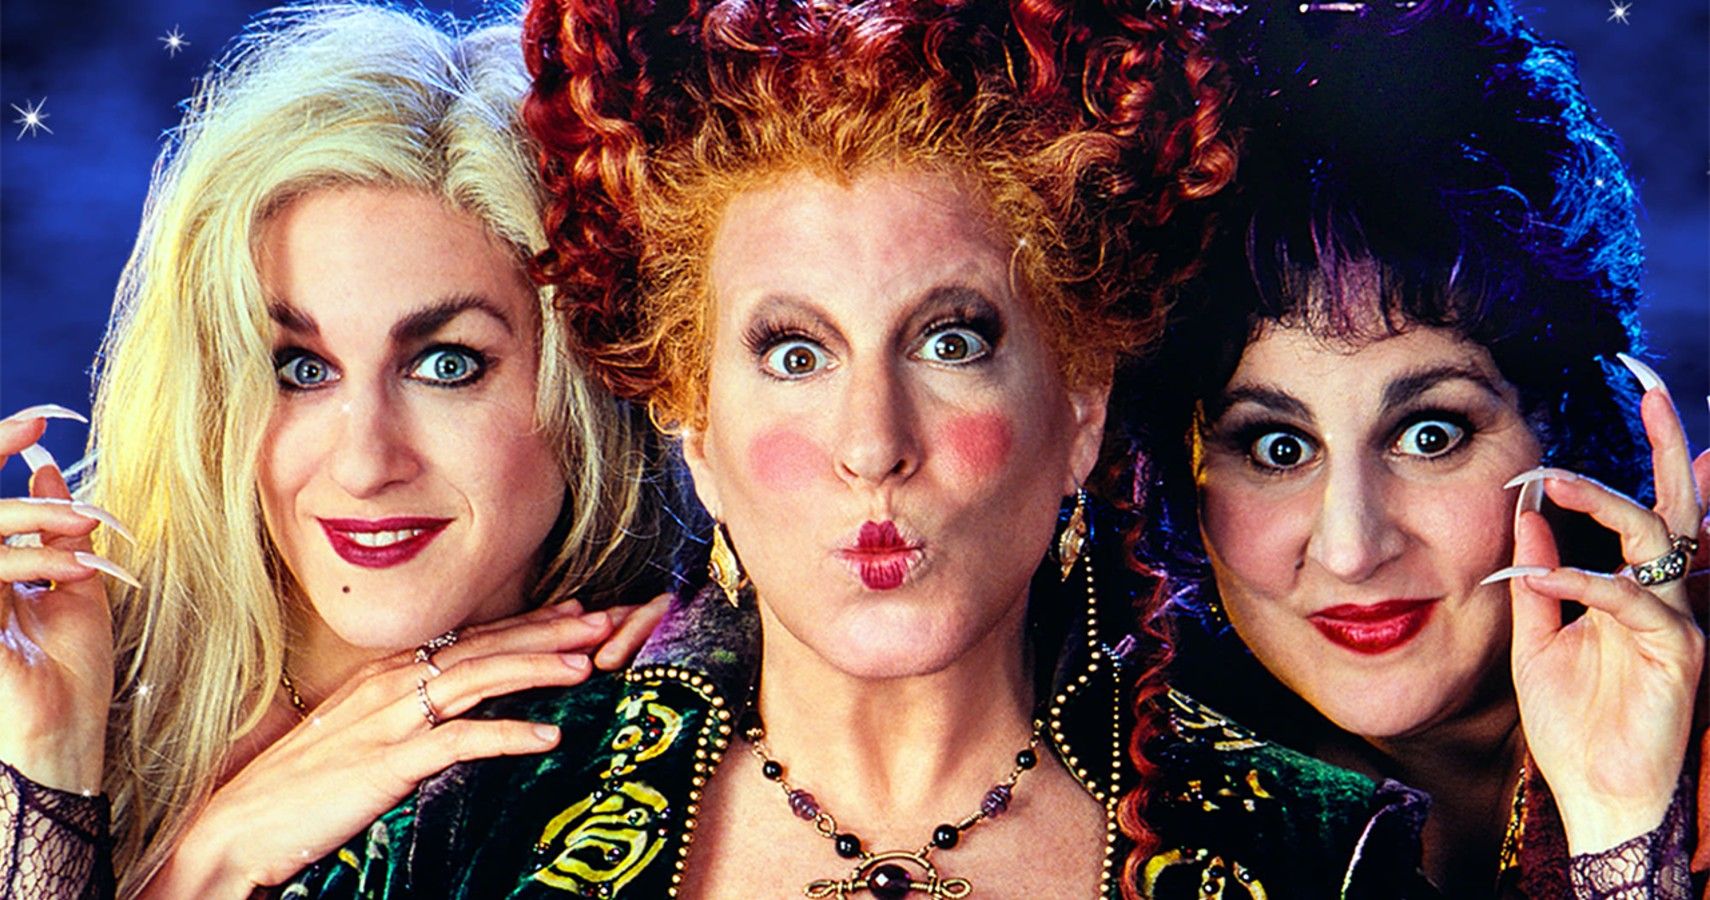 Hocus Pocus Gets a Virtual Reunion Just In Time For Halloween